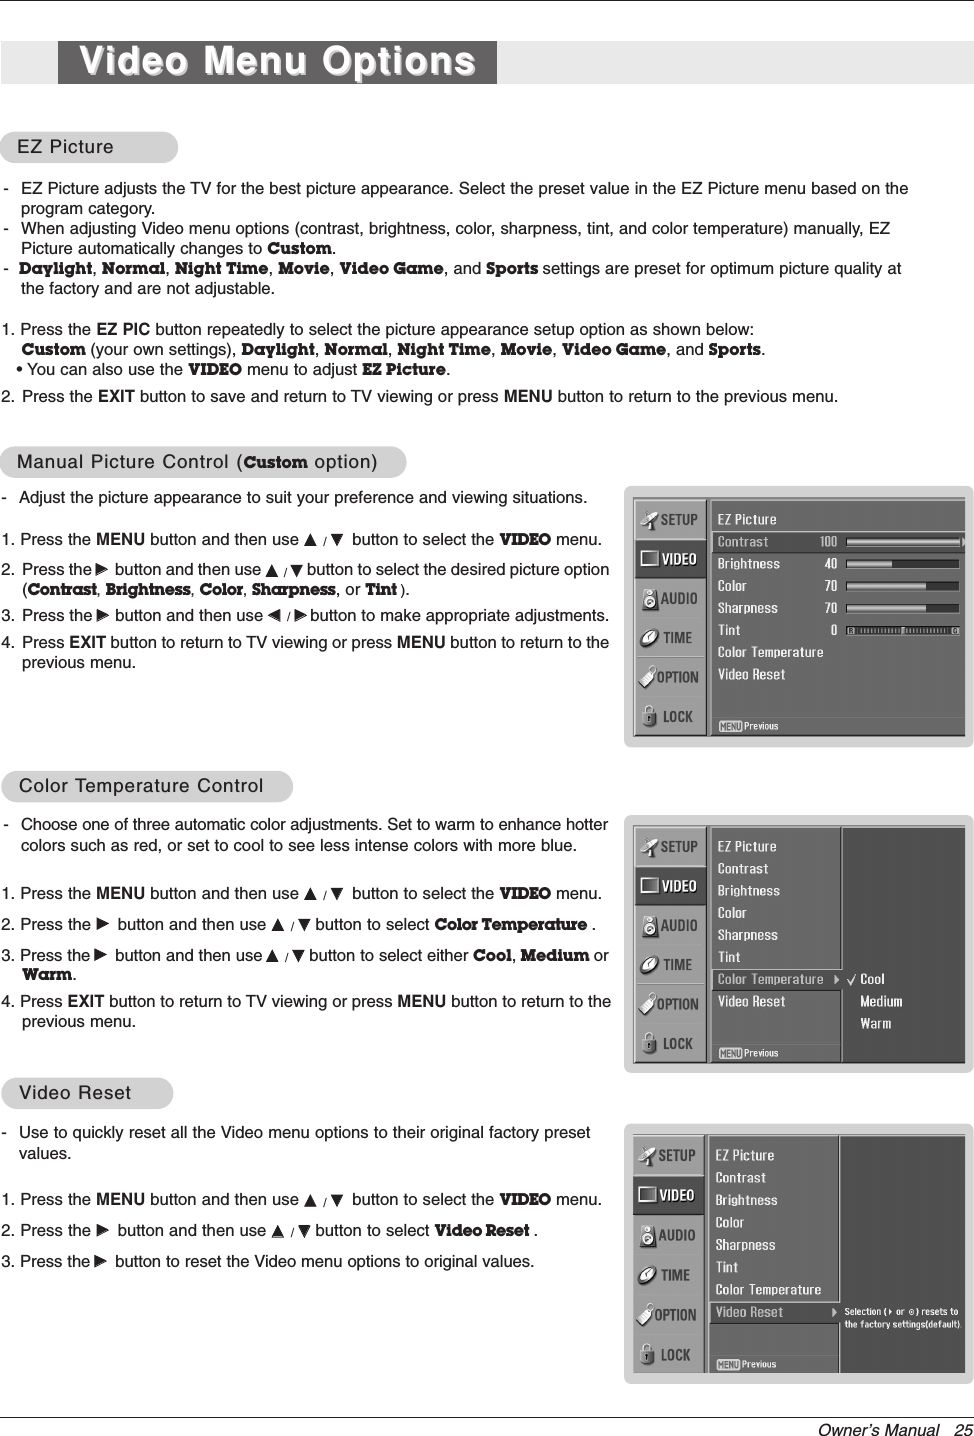 Owner’s Manual   25- Use to quickly reset all the Video menu options to their original factory presetvalues.1. Press the MENU button and then use DD  / EEbutton to select the VIDEO menu.2. Press the GGbutton and then use DD  / EEbutton to select Video Reset . 3. Press the GGbutton to reset the Video menu options to original values.VVideo Resetideo Reset- Adjust the picture appearance to suit your preference and viewing situations.1. Press the MENU button and then use DD  / EEbutton to select the VIDEO menu.2. Press the GGbutton and then use DD  / EEbutton to select the desired picture option(Contrast,Brightness,Color,Sharpness, or Tint ).3. Press the GGbutton and then use FF  / GGbutton to make appropriate adjustments.4. Press EXIT button to return to TV viewing or press MENU button to return to theprevious menu.1. Press the EZ PIC button repeatedly to select the picture appearance setup option as shown below:Custom (your own settings), Daylight, Normal, Night Time, Movie, Video Game, and Sports.• You can also use the VIDEO menu to adjust EZ Picture.2. Press the EXIT button to save and return to TV viewing or press MENU button to return to the previous menu. EZ PictureEZ PictureManual Picture Control (Manual Picture Control (Custom option)option)- Choose one of three automatic color adjustments. Set to warm to enhance hottercolors such as red, or set to cool to see less intense colors with more blue.1. Press the MENU button and then use DD  / EEbutton to select the VIDEO menu.2. Press the GGbutton and then use DD  / EEbutton to select Color Temperature . 3. Press the GGbutton and then use DD  / EEbutton to select either Cool,Medium orWarm.4. Press EXIT button to return to TV viewing or press MENU button to return to theprevious menu.Color Color TTemperature Controlemperature Control- EZ Picture adjusts the TV for the best picture appearance. Select the preset value in the EZ Picture menu based on theprogram category.- When adjusting Video menu options (contrast, brightness, color, sharpness, tint, and color temperature) manually, EZPicture automatically changes to Custom.-Daylight, Normal, Night Time, Movie, Video Game, and Sports settings are preset for optimum picture quality atthe factory and are not adjustable.VVideo Menu Optionsideo Menu Options